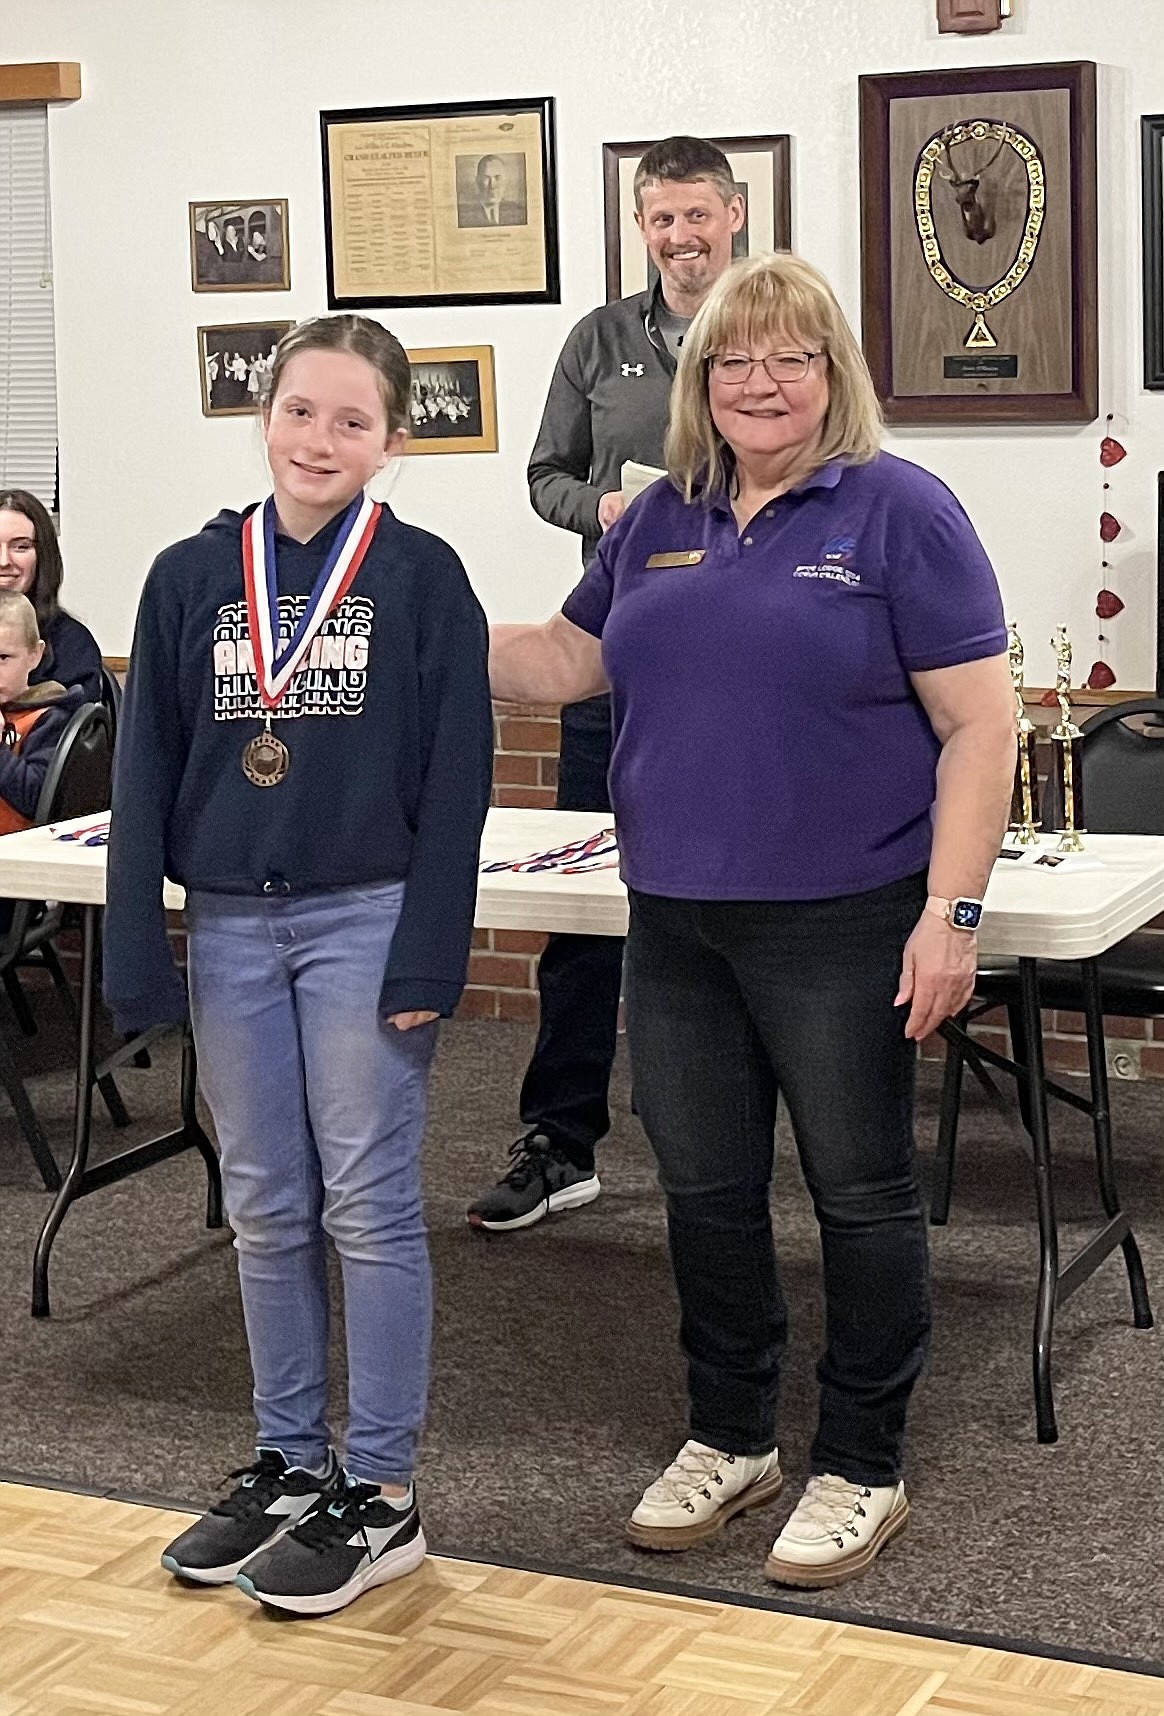 Courtesy photo
BrieLynn Jones won the girls 10-11 age division at the Coeur d'Alene Elks Hoop Shoot held Feb. 20 at The Courts at Real Life in Post Falls. Also pictured is Debbi Nadrchal, Elks Exalted Ruler, and Todd Stoddard, Hoop Shoot director.